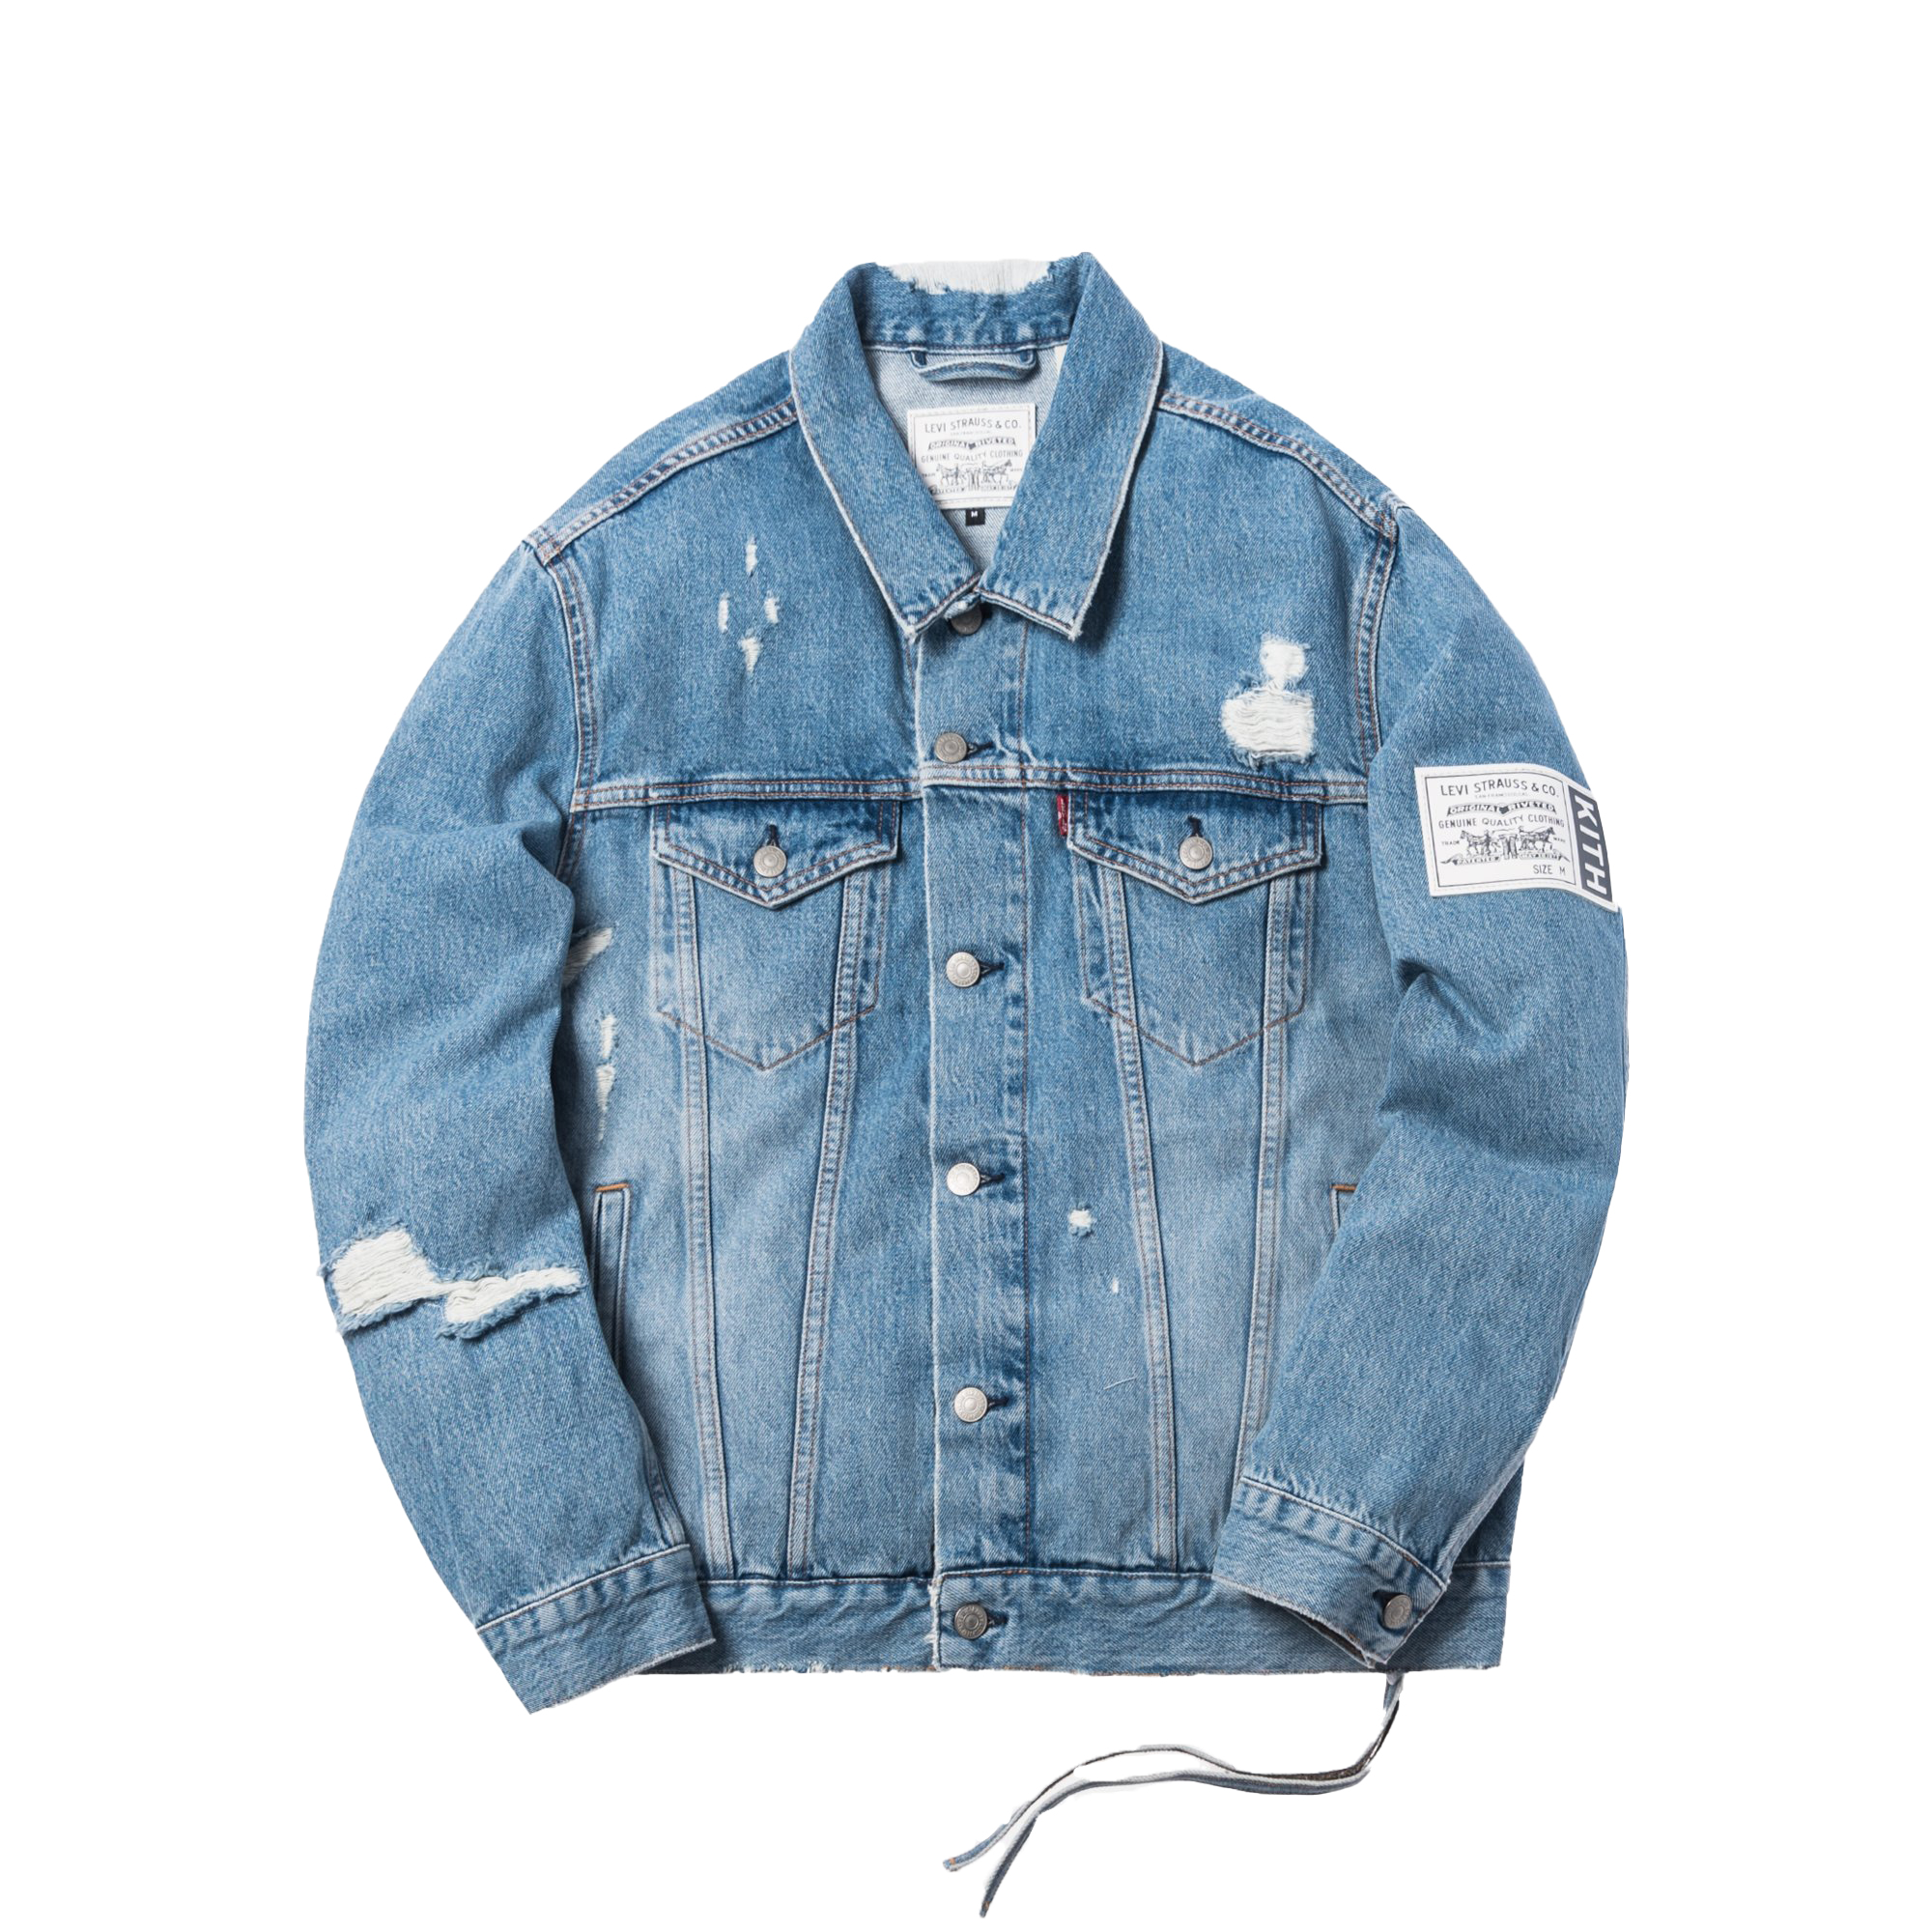 Levis jacket hunting patches